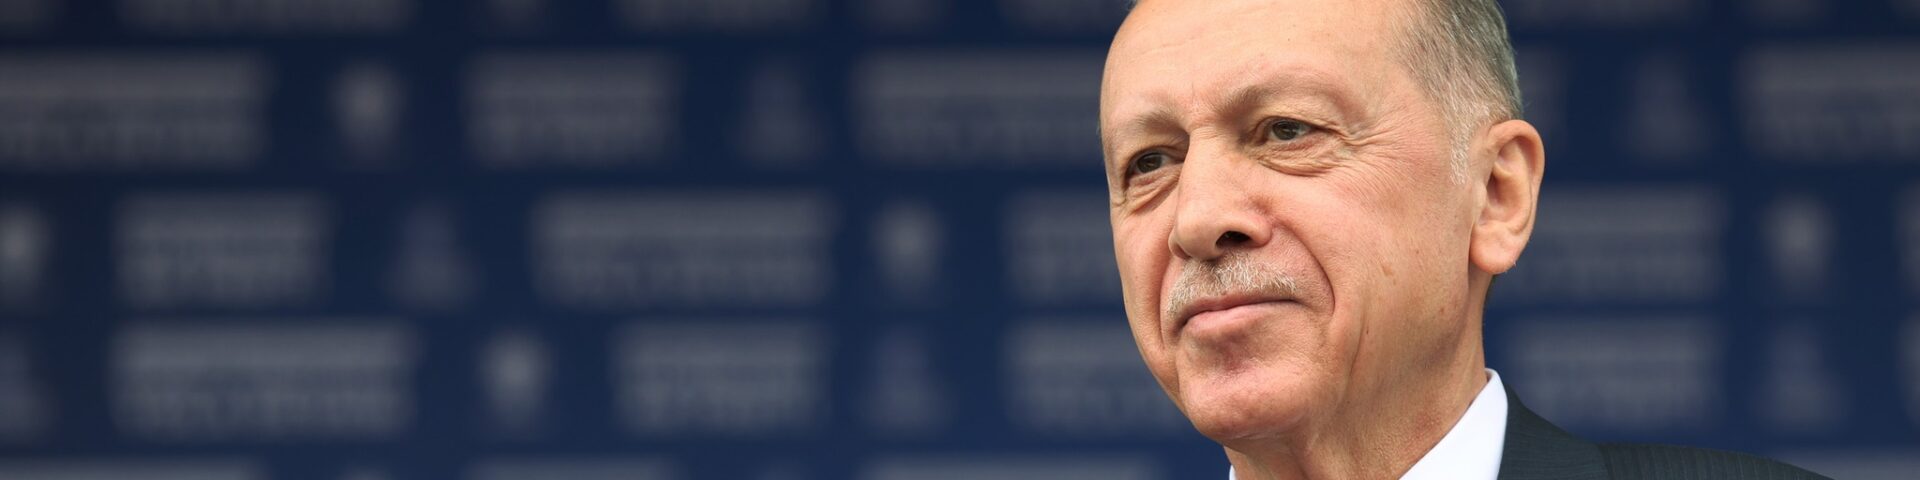 Erdoğan Is in for a Tough New Term